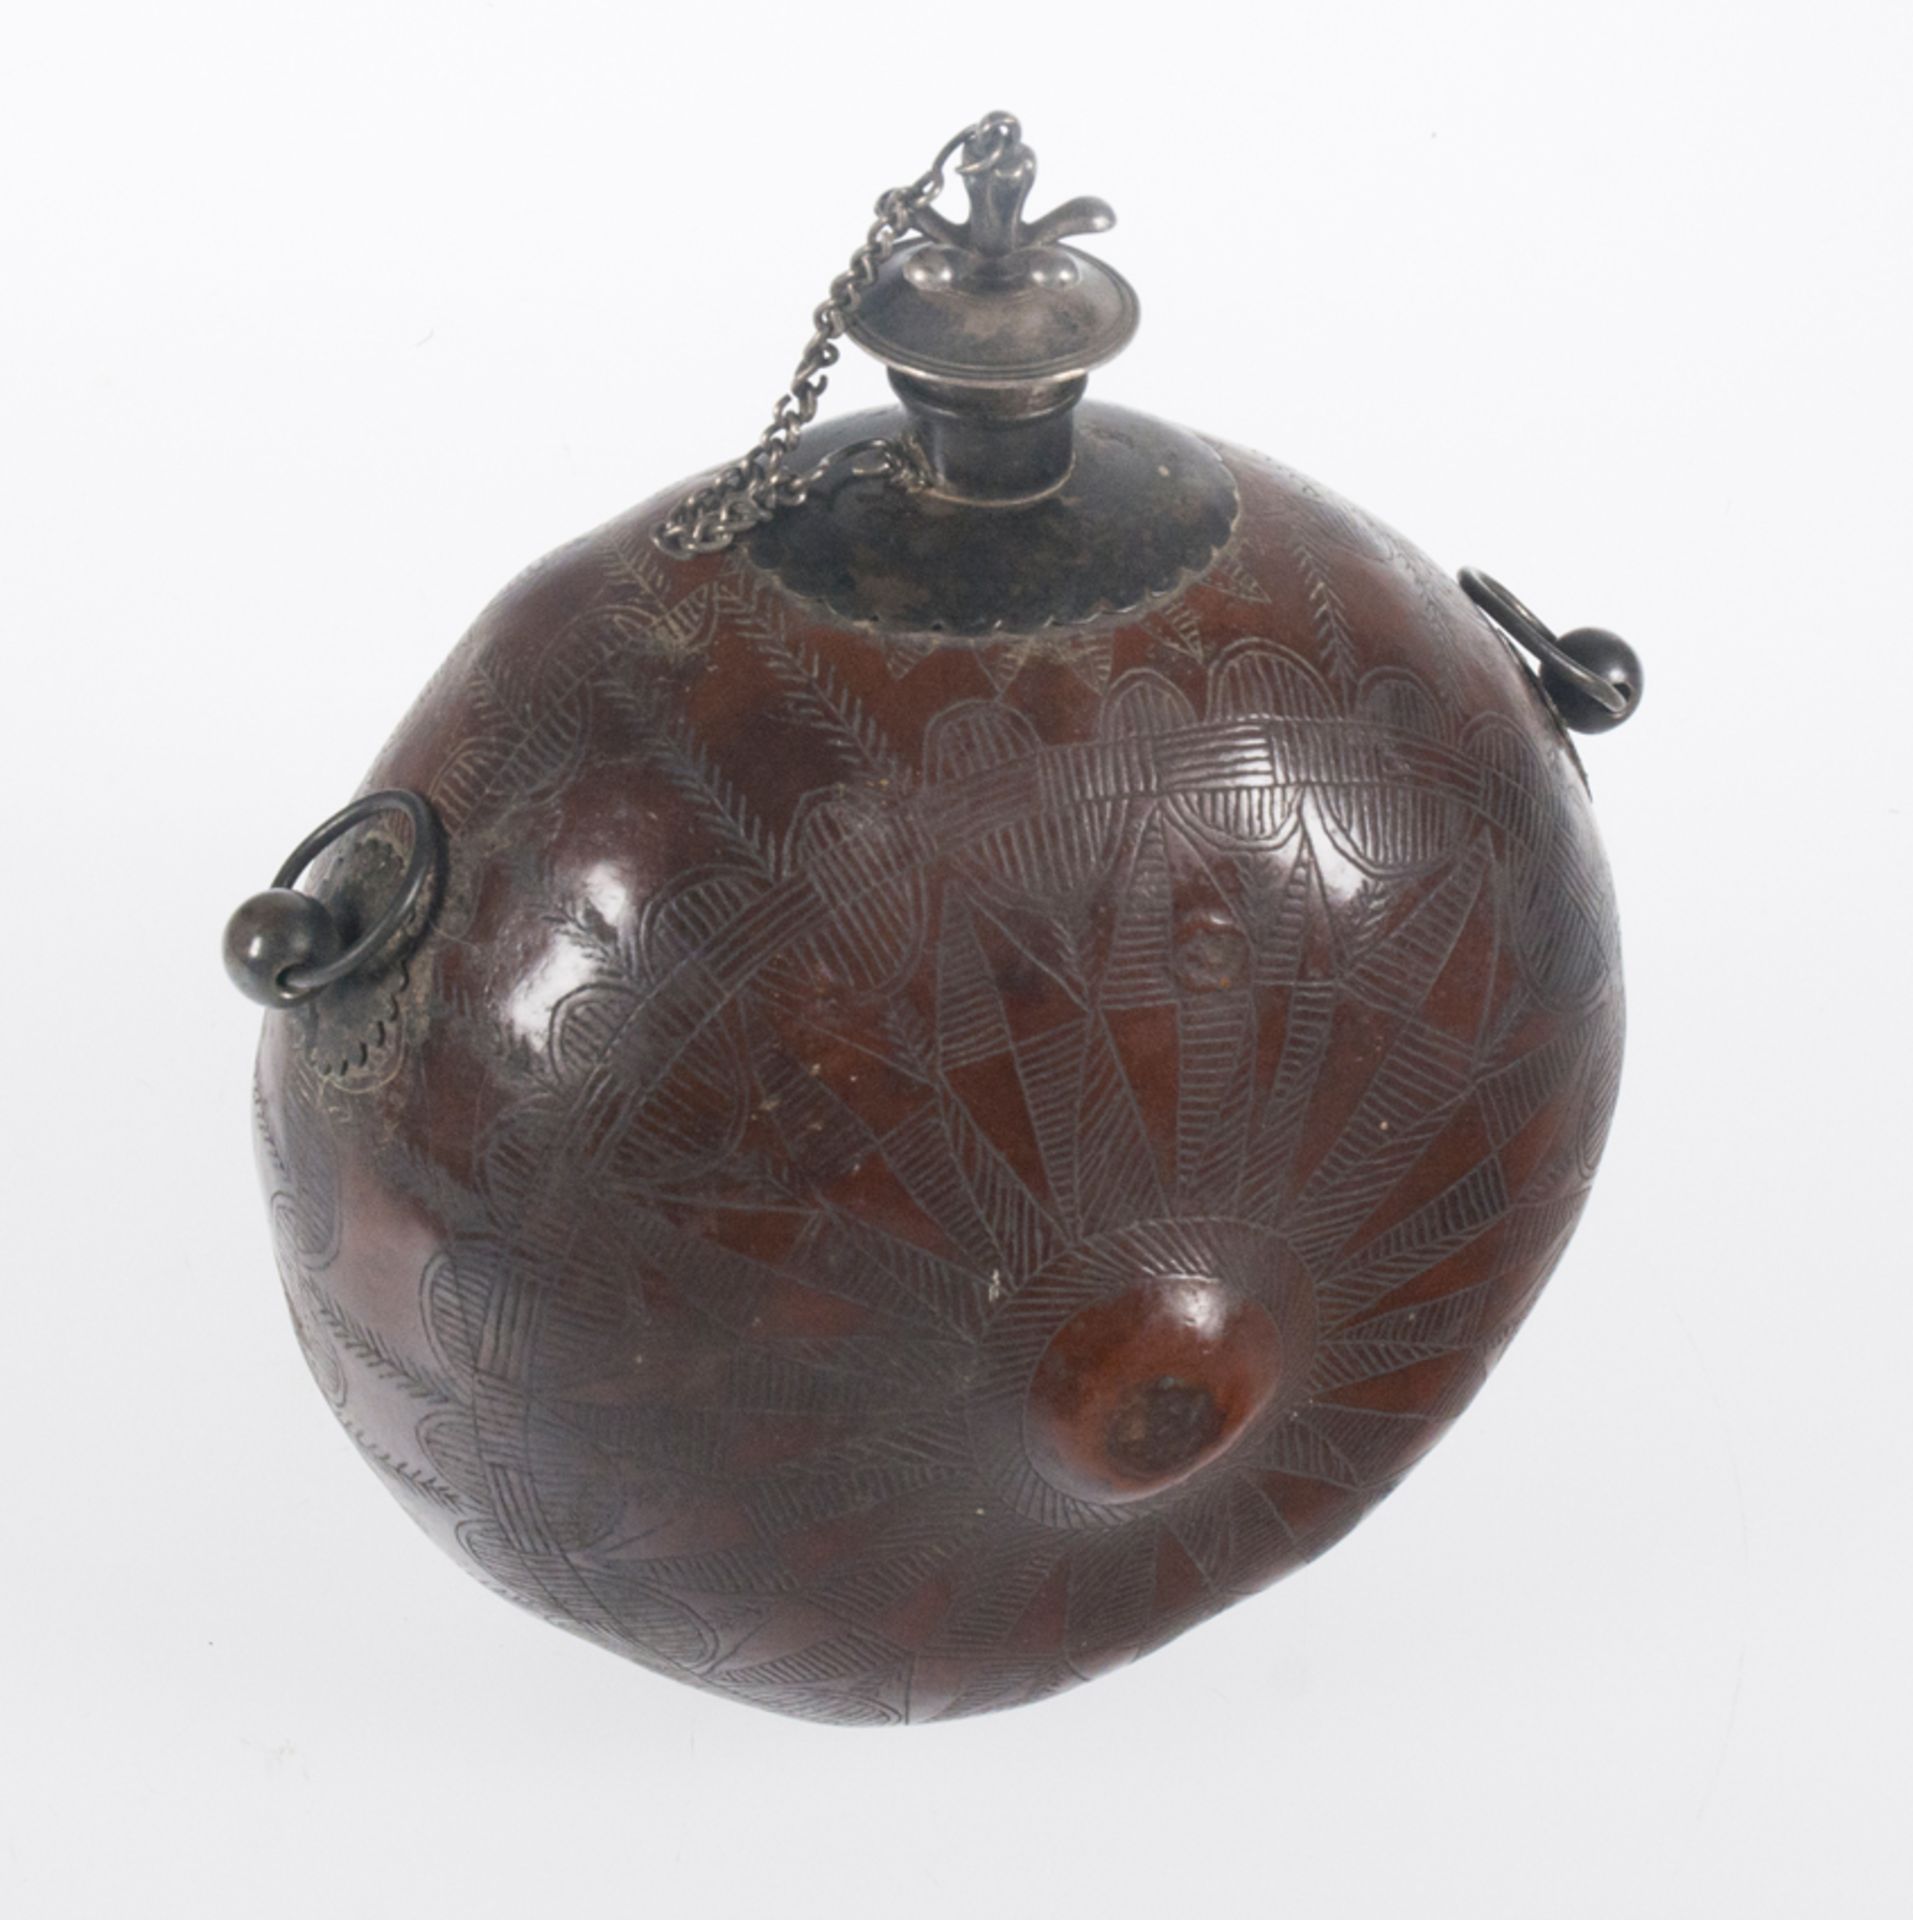 Canteen. Engraved gourd with silver applications. Colonial work. Mexico or Peru. 18th century. - Image 3 of 5